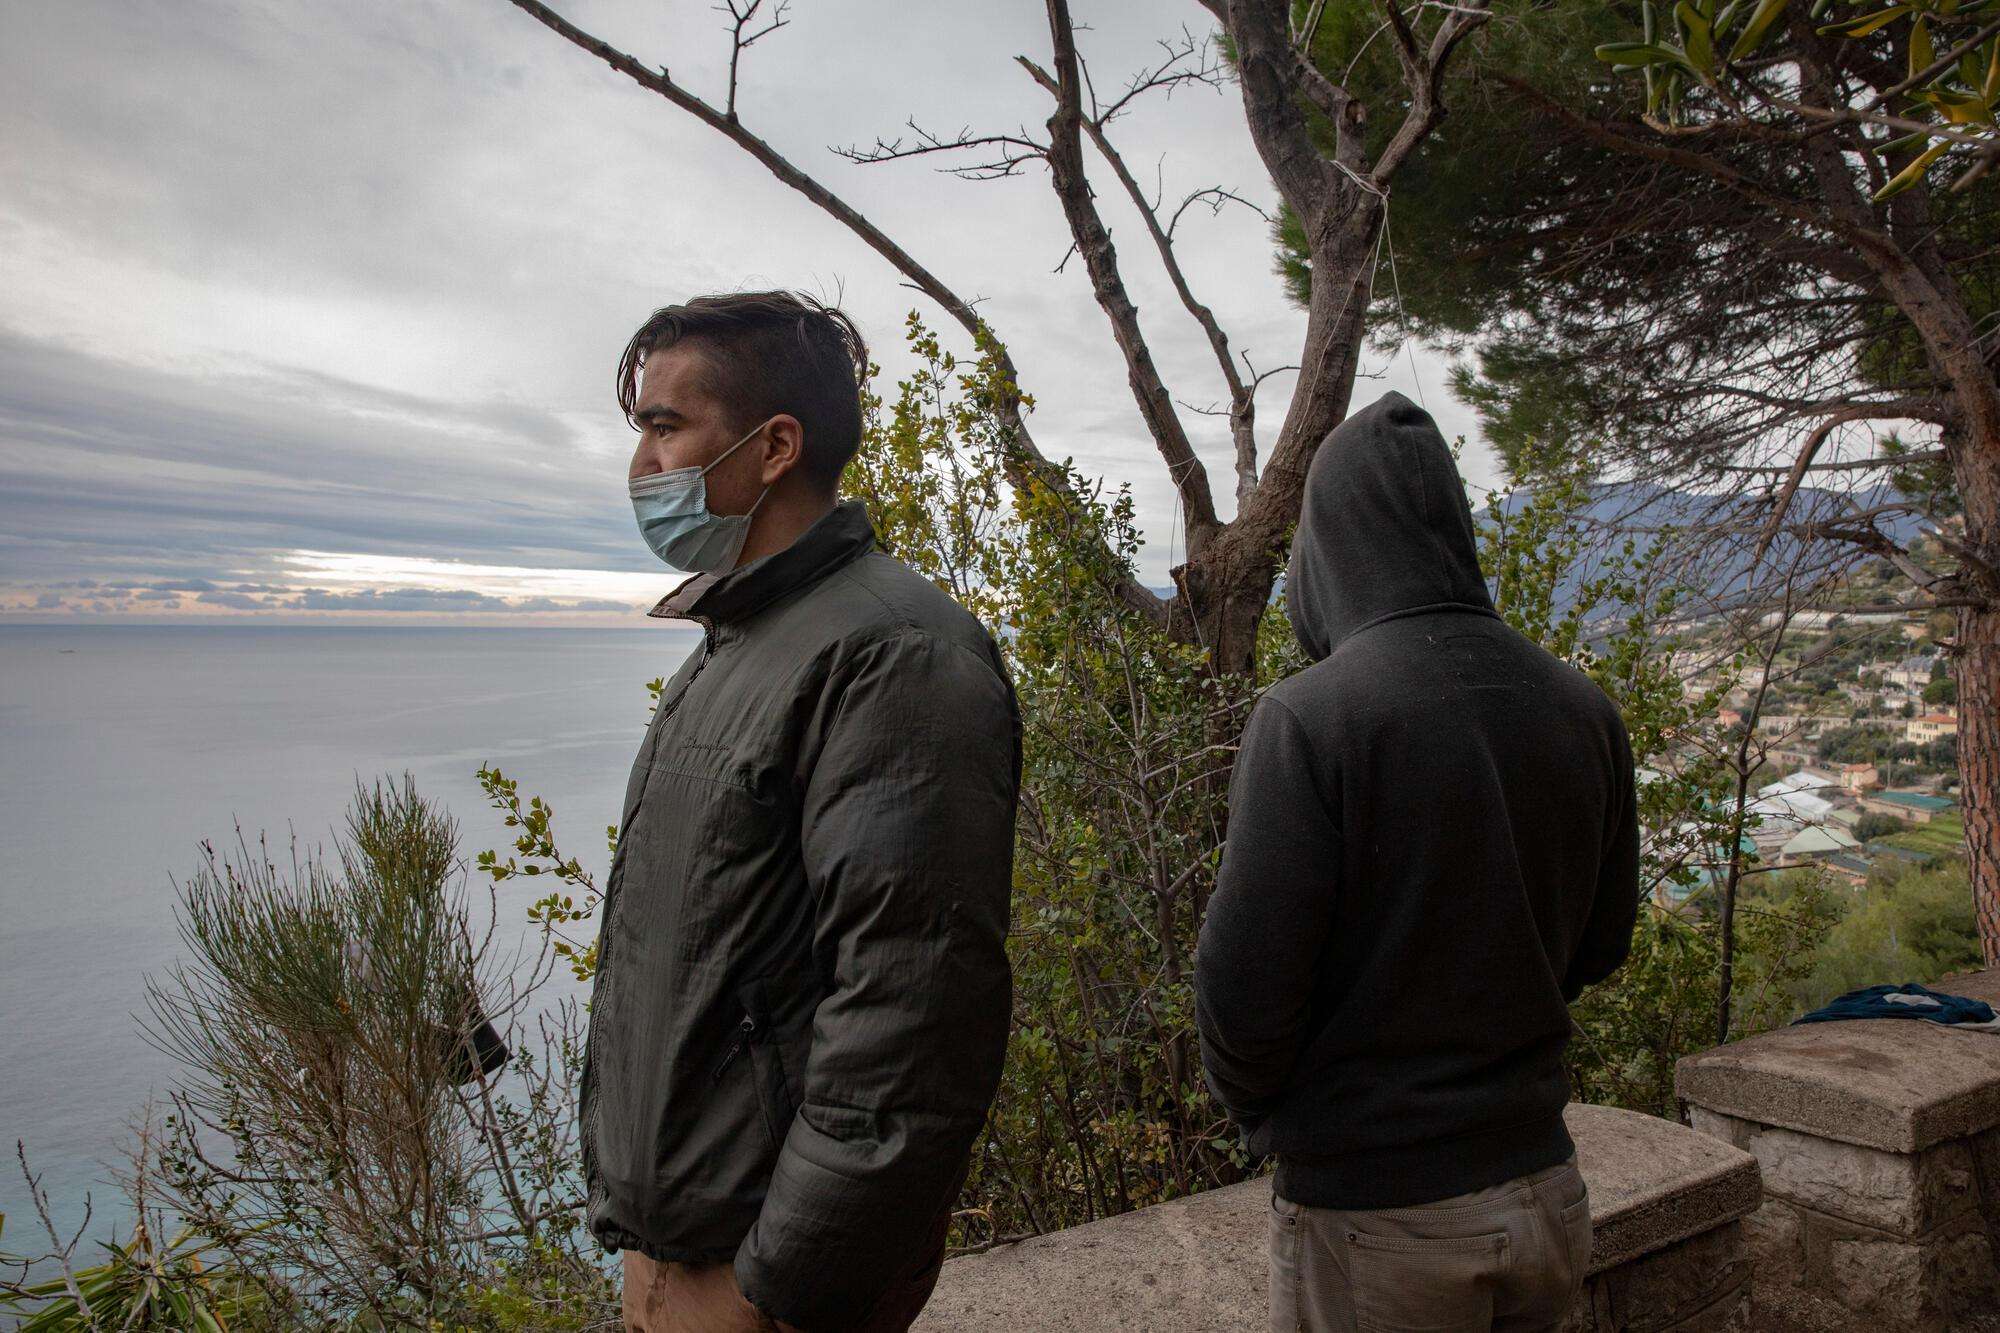 Two refugees look out over the Mediterranean Sea above Ventimiglia.